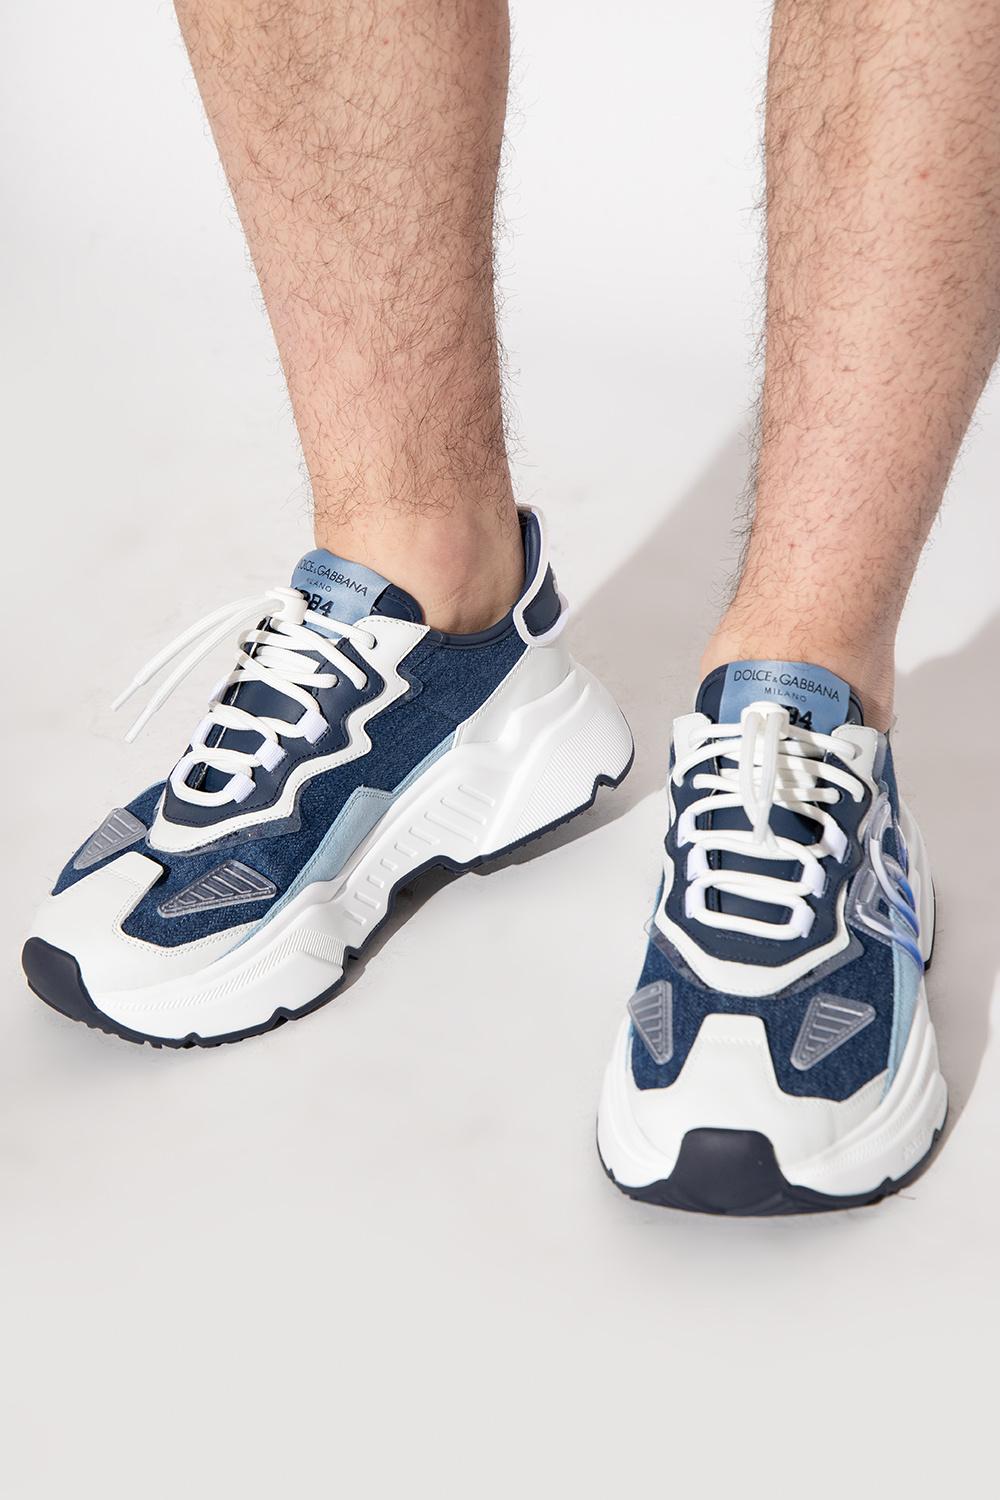 Dolce & Gabbana 'daymaster' Sneakers in Blue for Men | Lyst